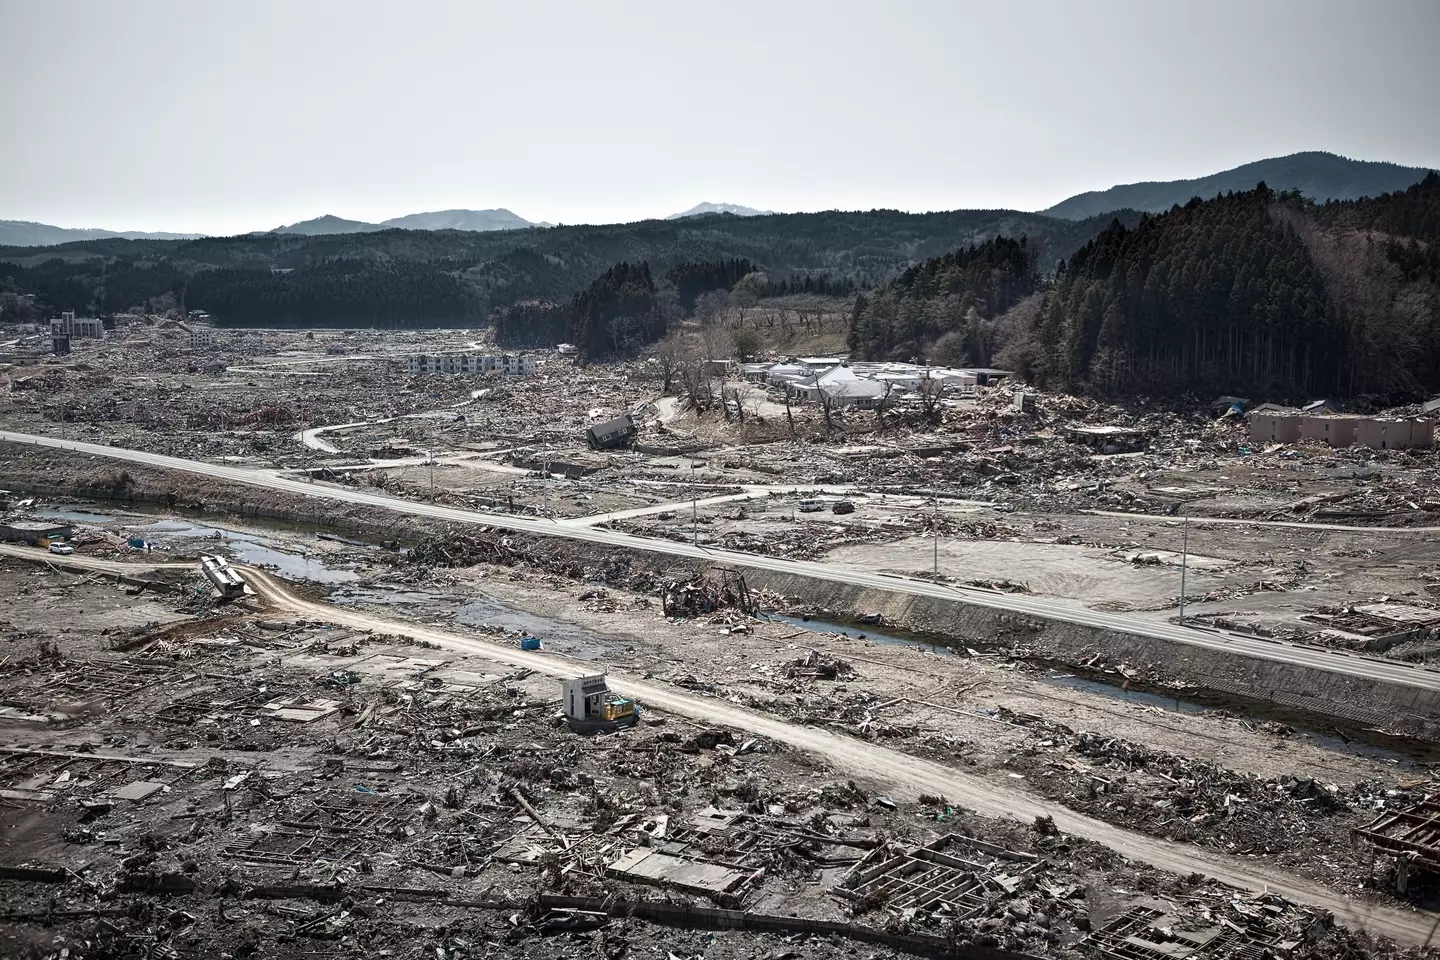 Over 19,000 people died following the 2011 earthquake in Japan.